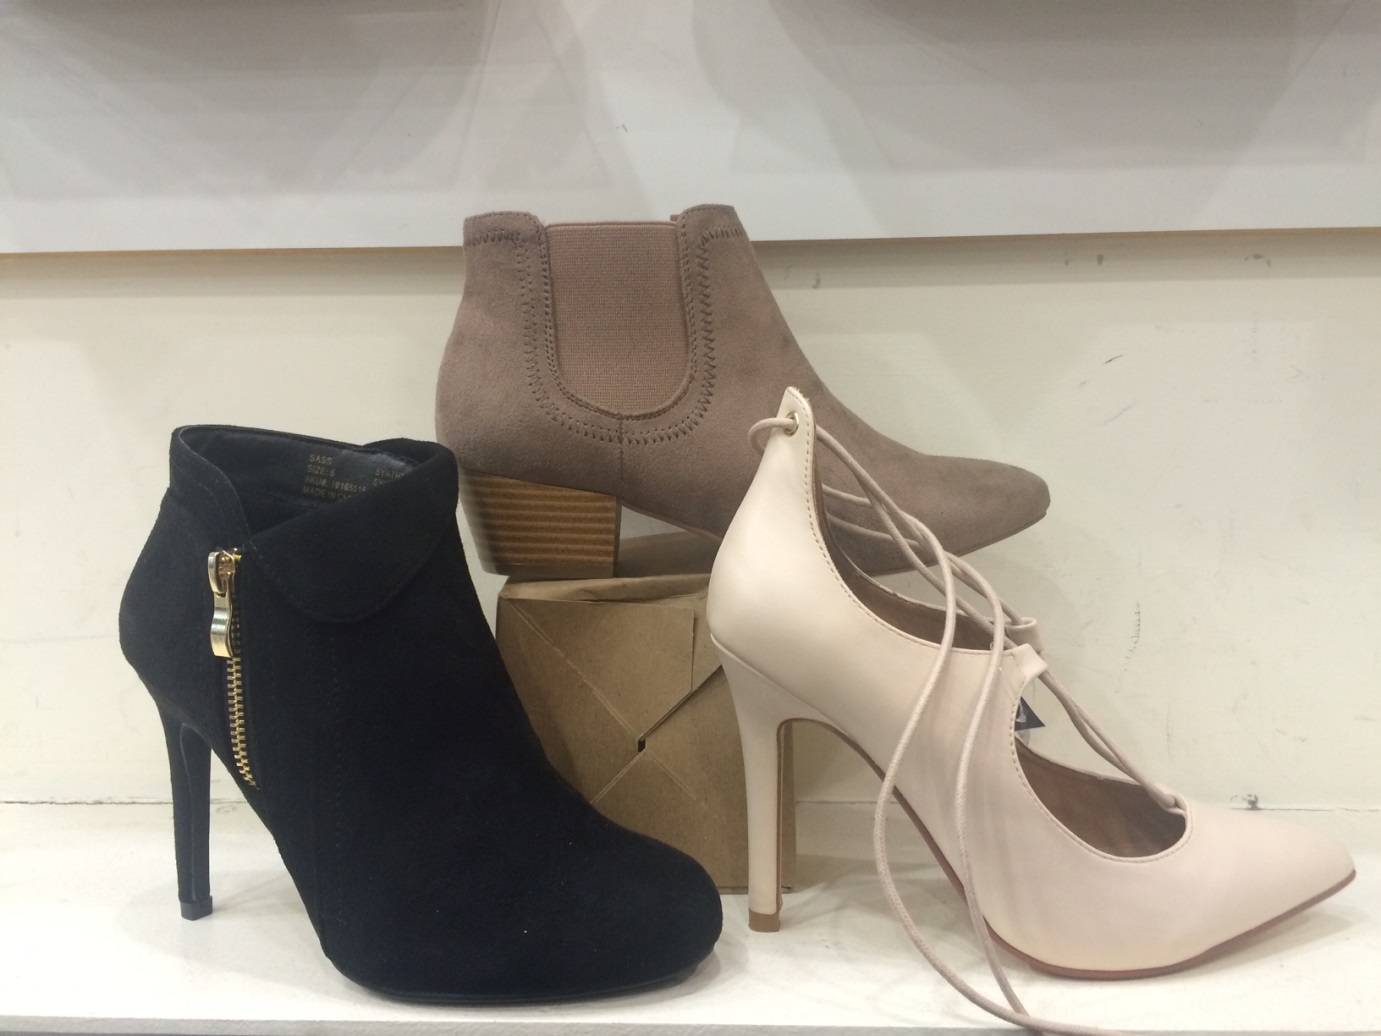 Shop the Look:  Payless Shoes